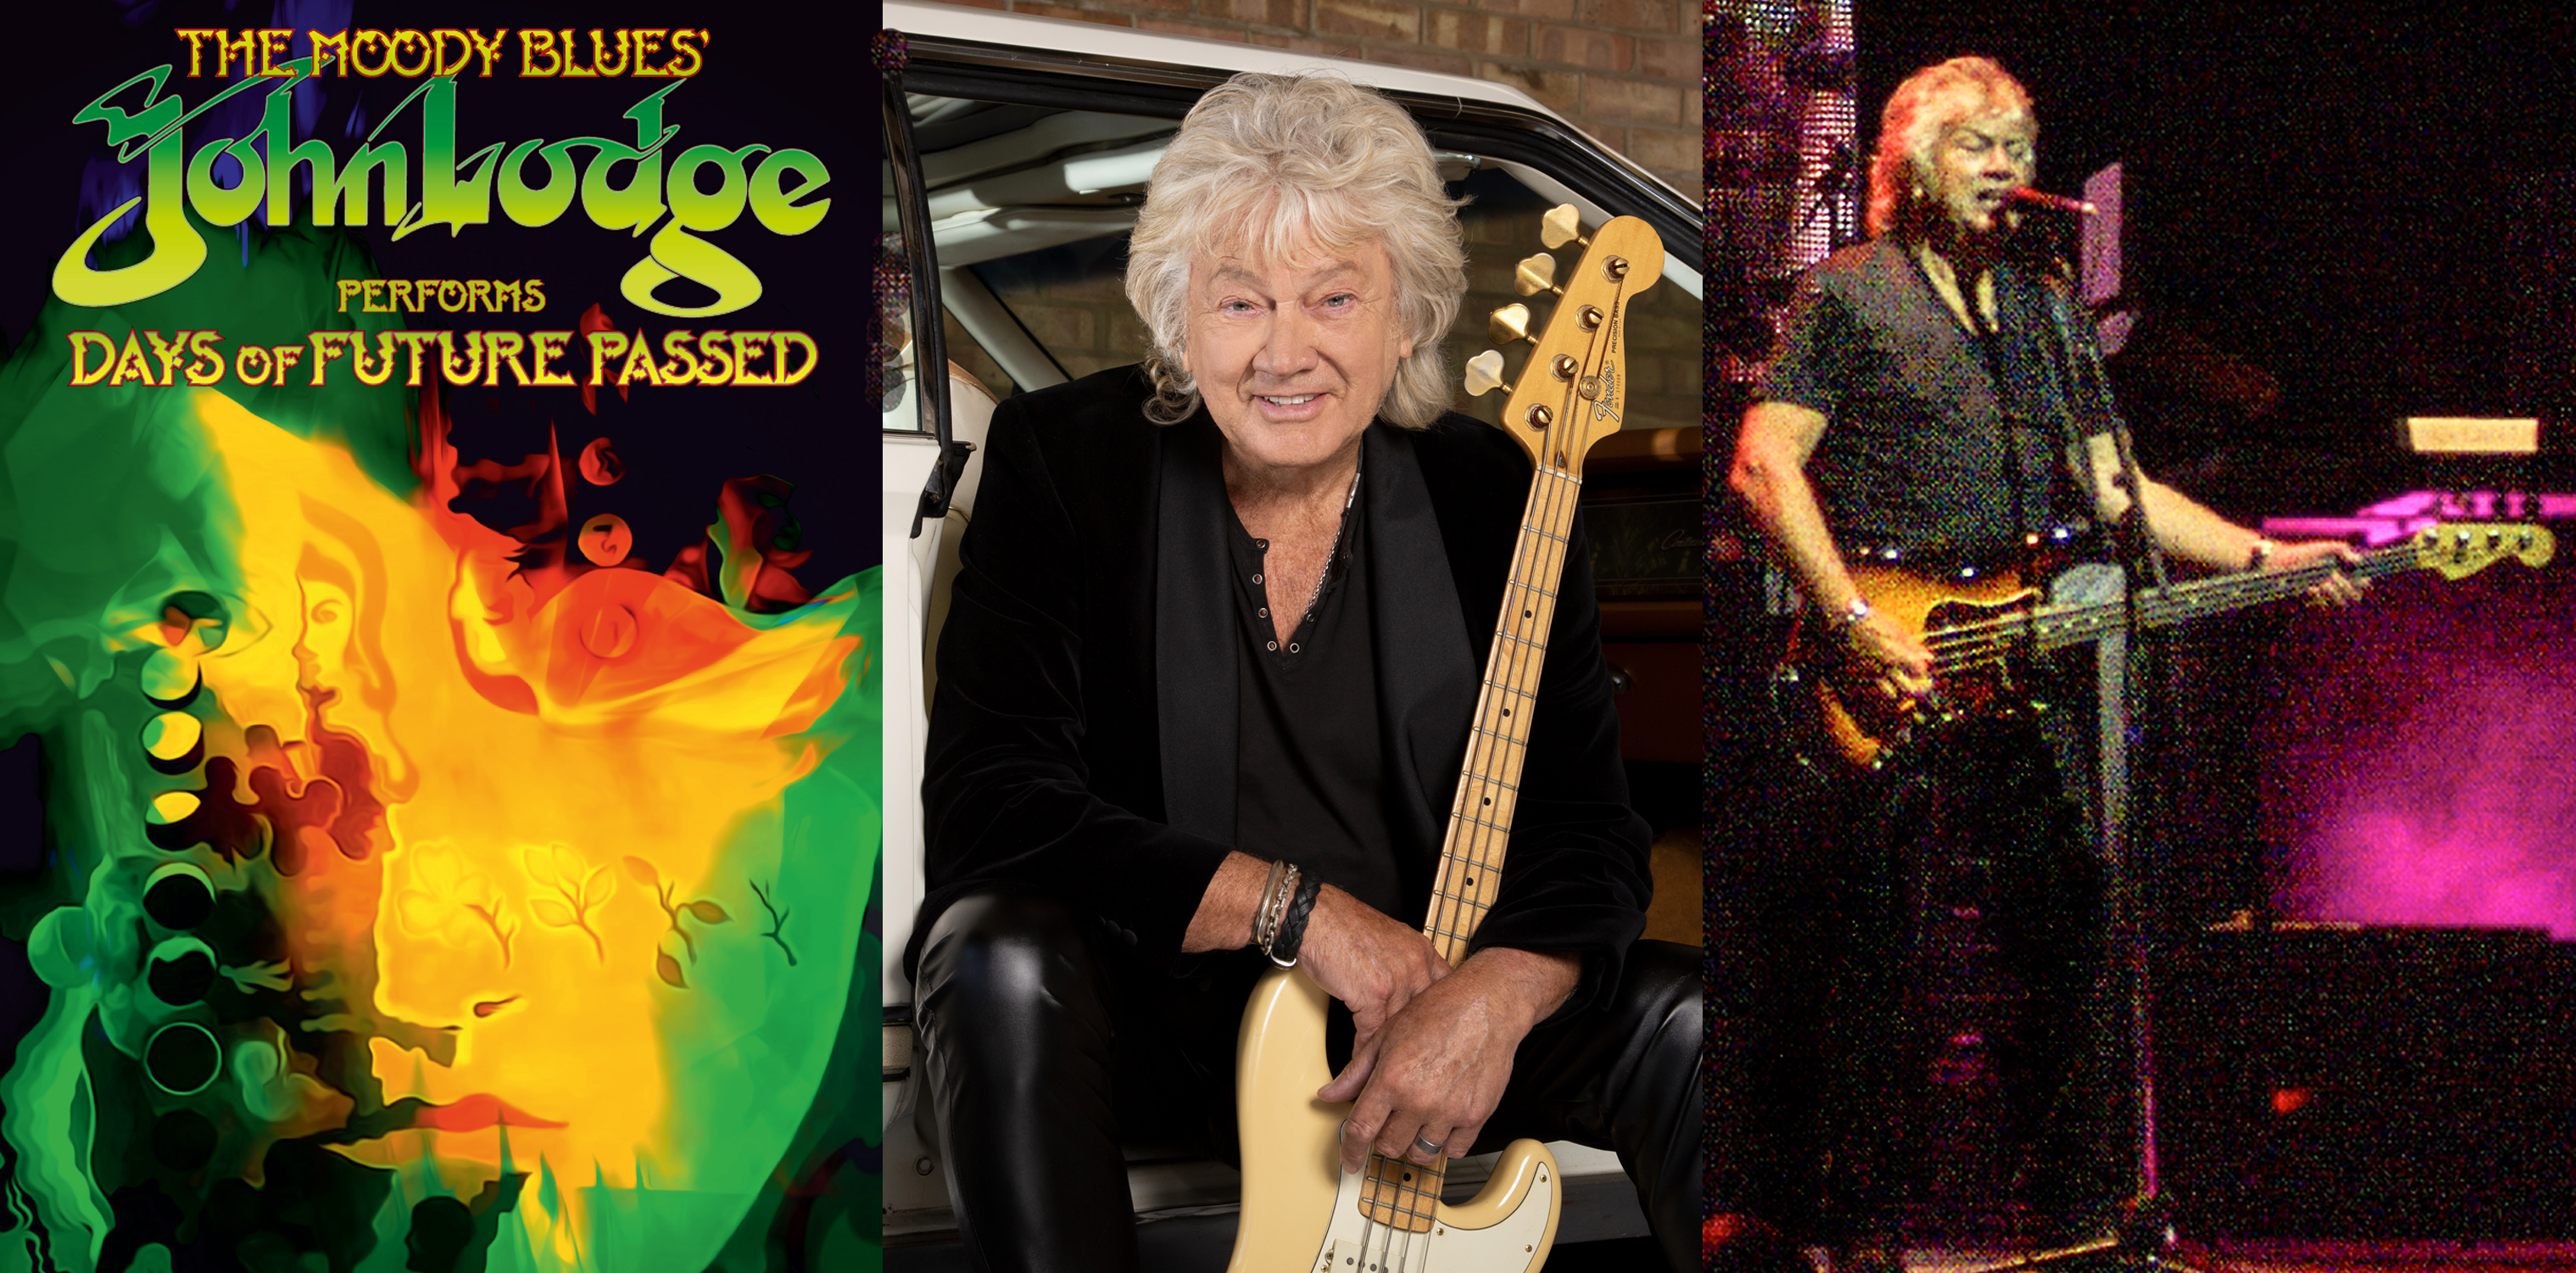 Grateful Web Interview: John Lodge of The Moody Blues